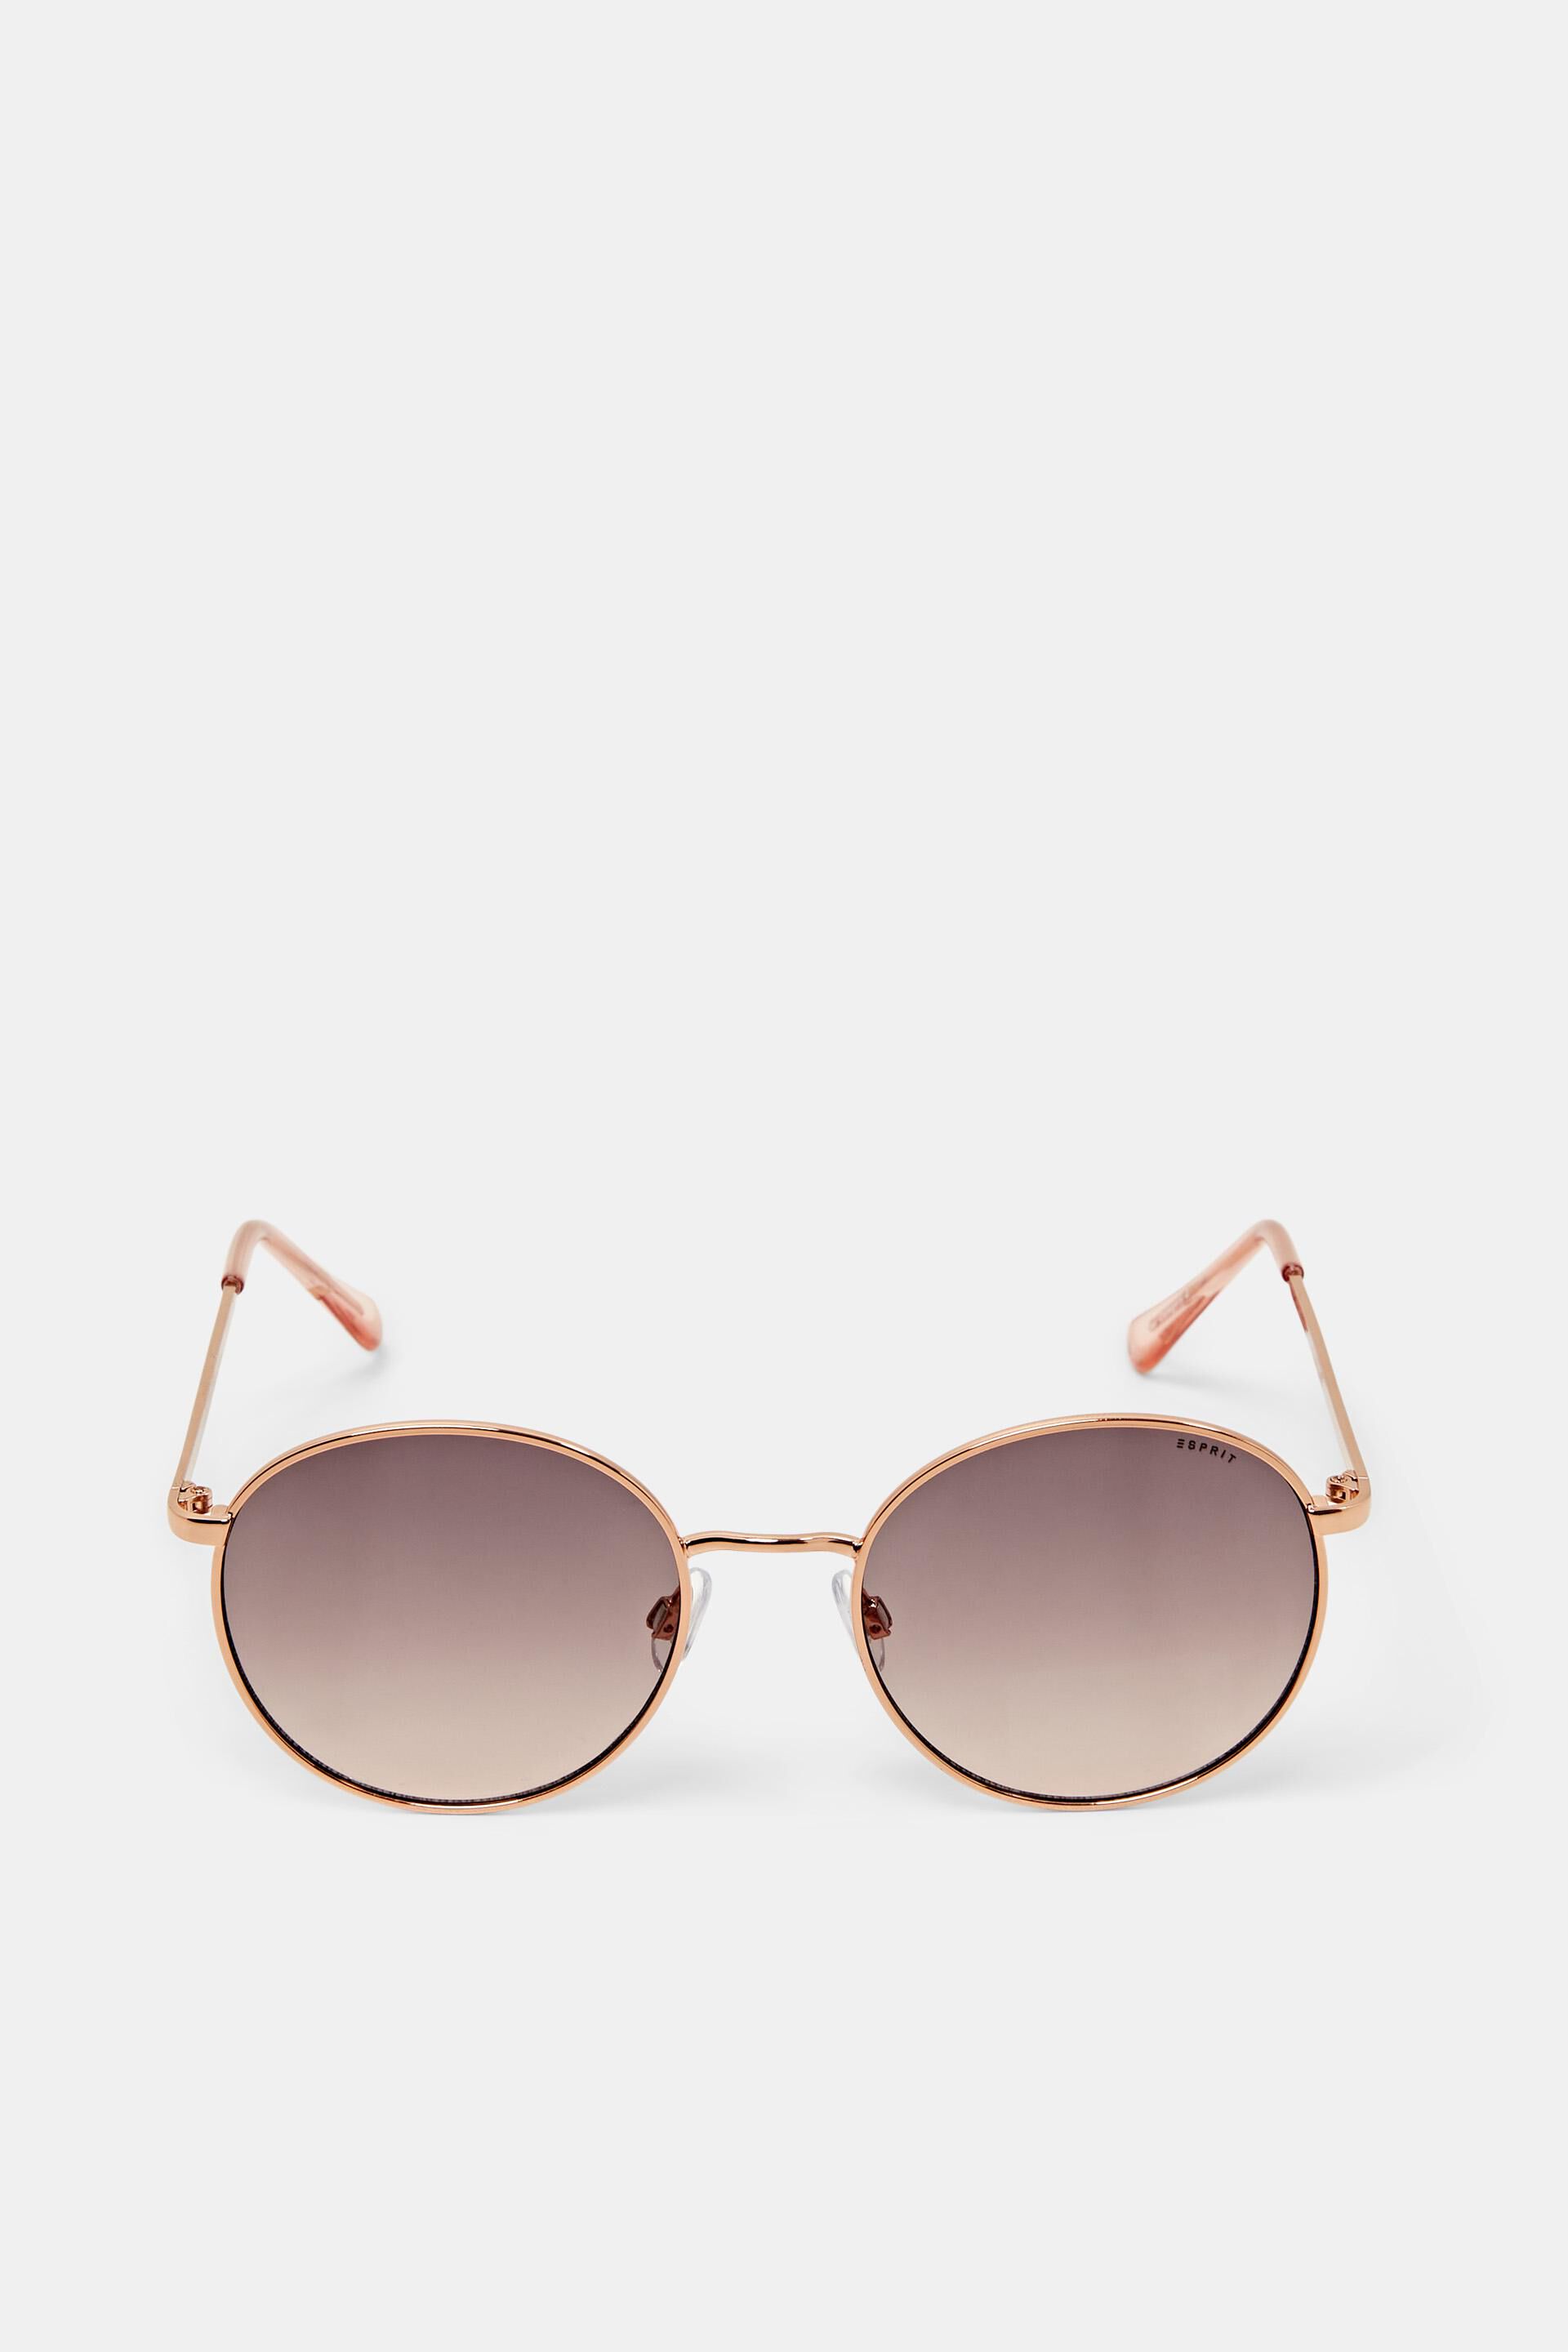 Esprit Online Store Sunglasses with frames metal